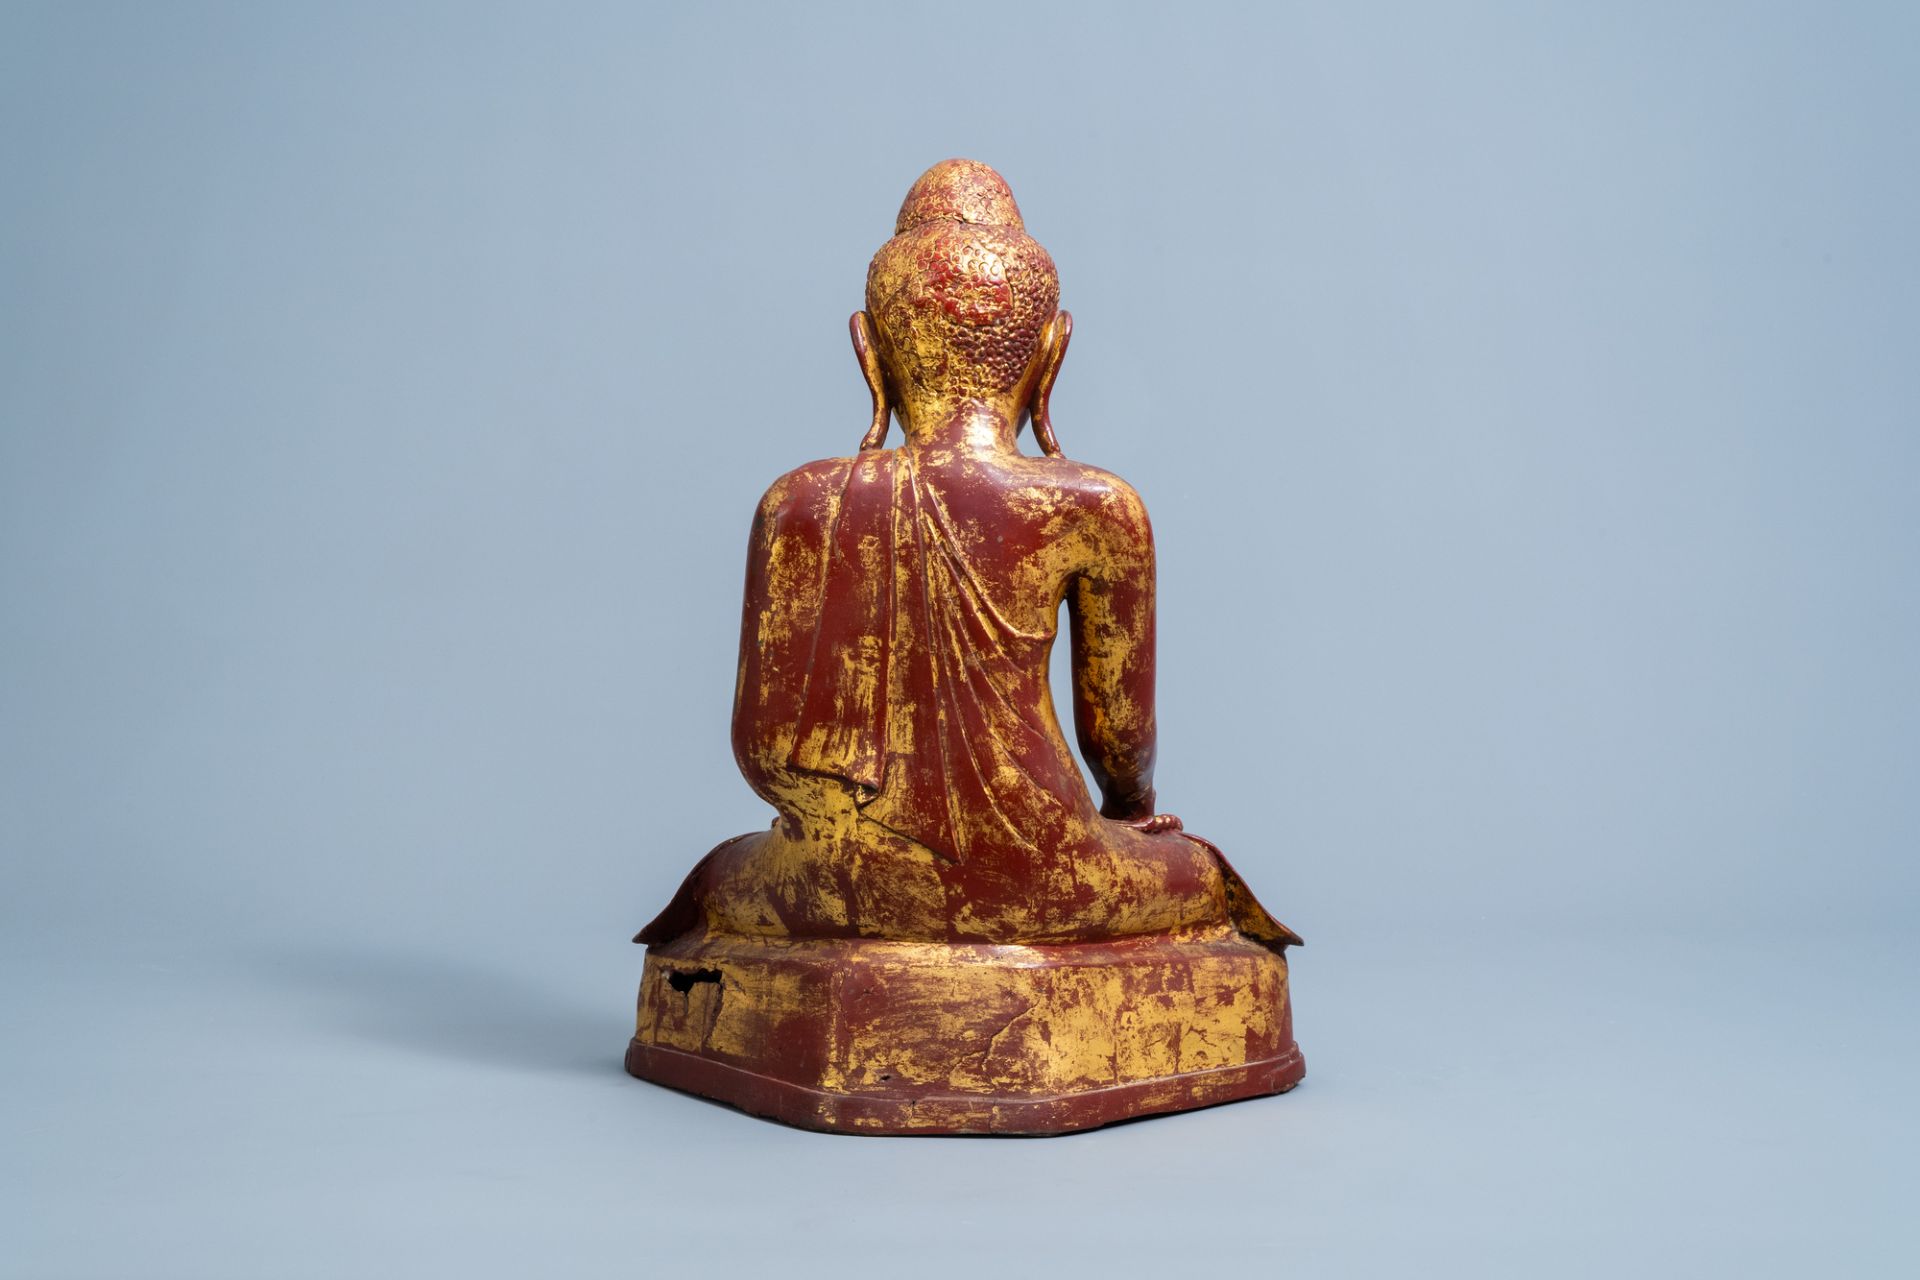 A large gilt and lacquered bronze Buddha figure, Burma, Mandalay period, 19th C. - Image 3 of 4